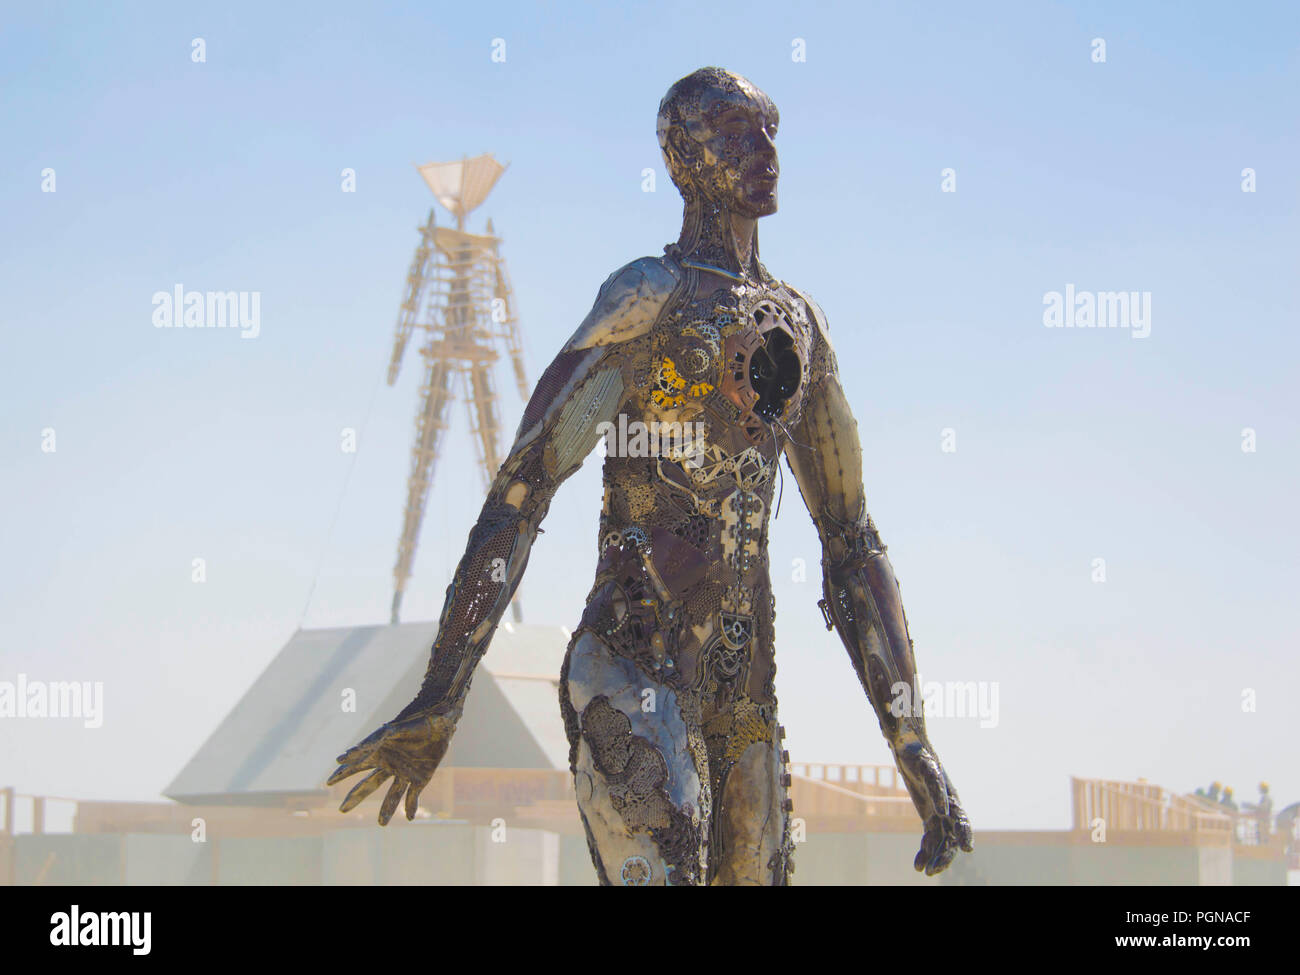 Workers assembly an art installation in preparation at the for attendees at the annual Burning Man counter culture festival in the desert August 23, 2018 near Black Rock, Nevada. Each year 80,000 of people set up a temporary art city in the middle of the desert. Stock Photo